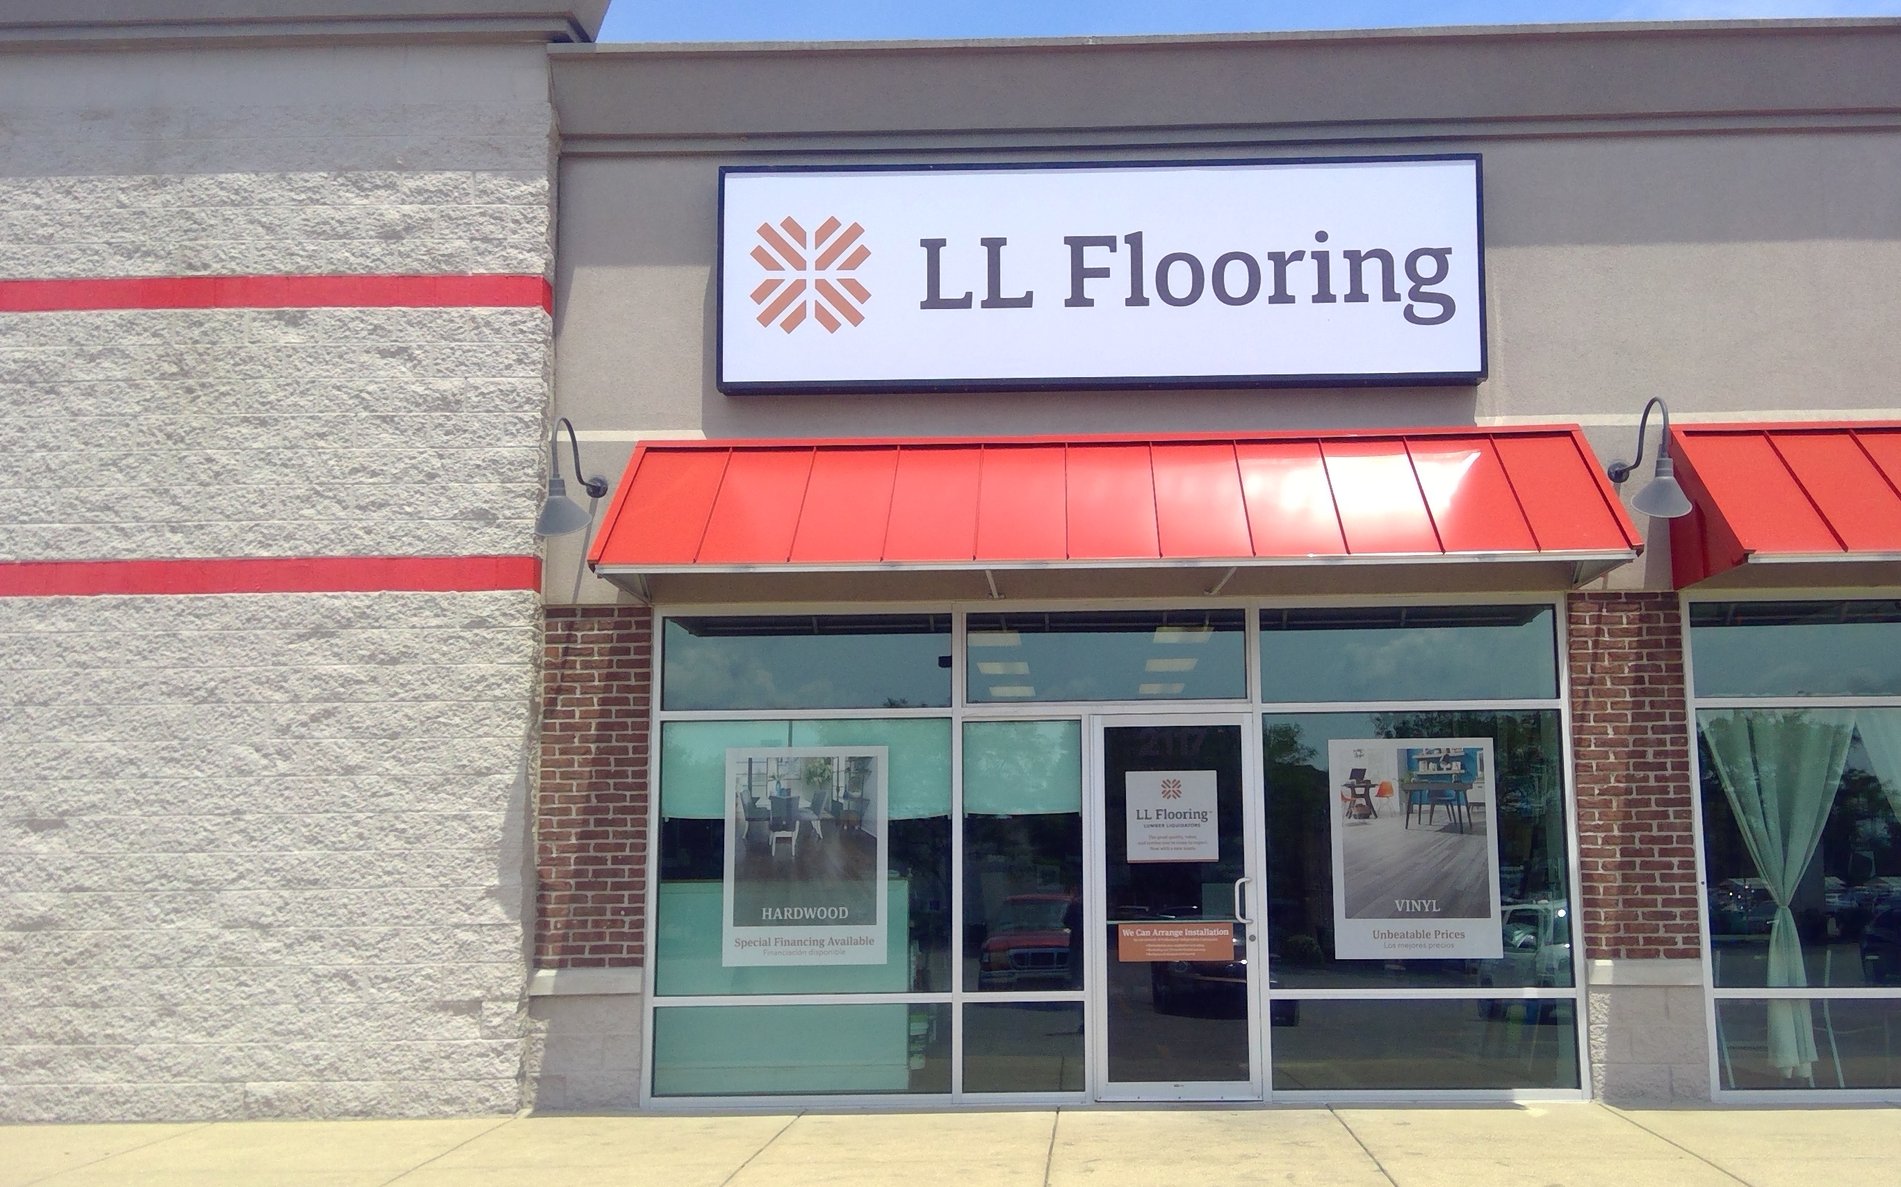 LL Flooring #1244 Greenwood | 2117 Independence Drive | Storefront